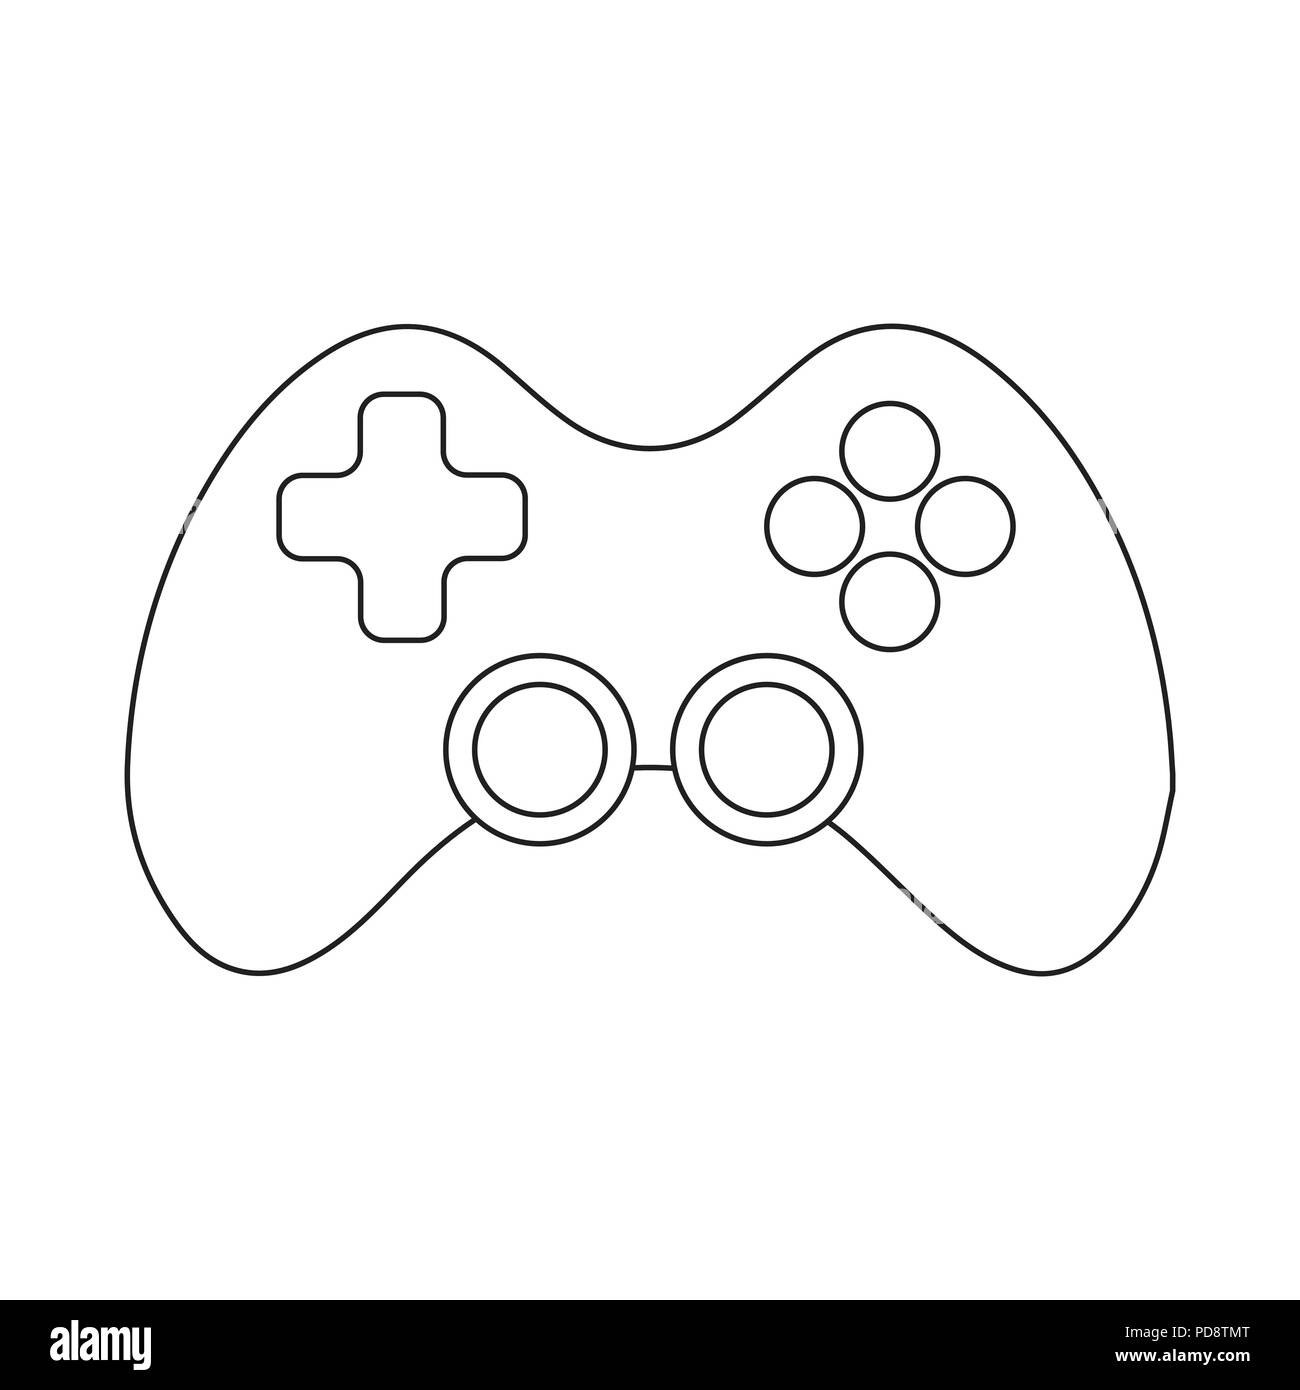 Vector doodle game controller icon illustration with color, drawn on